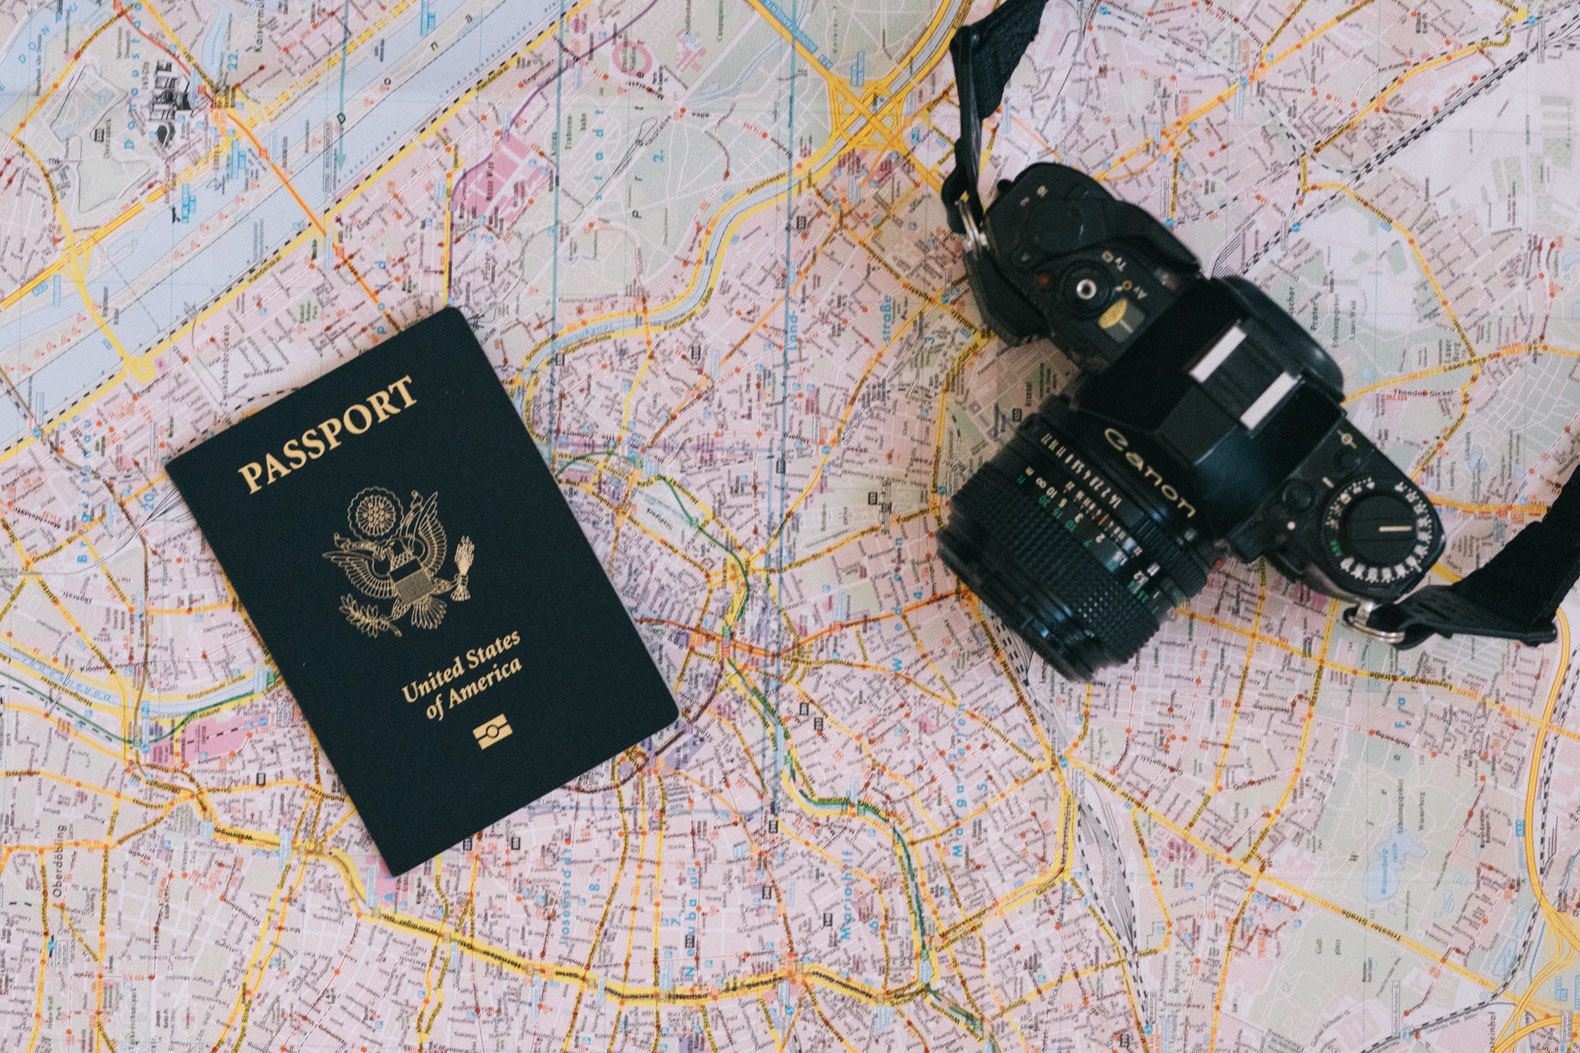 Passport, film camera, and an ipad on a map